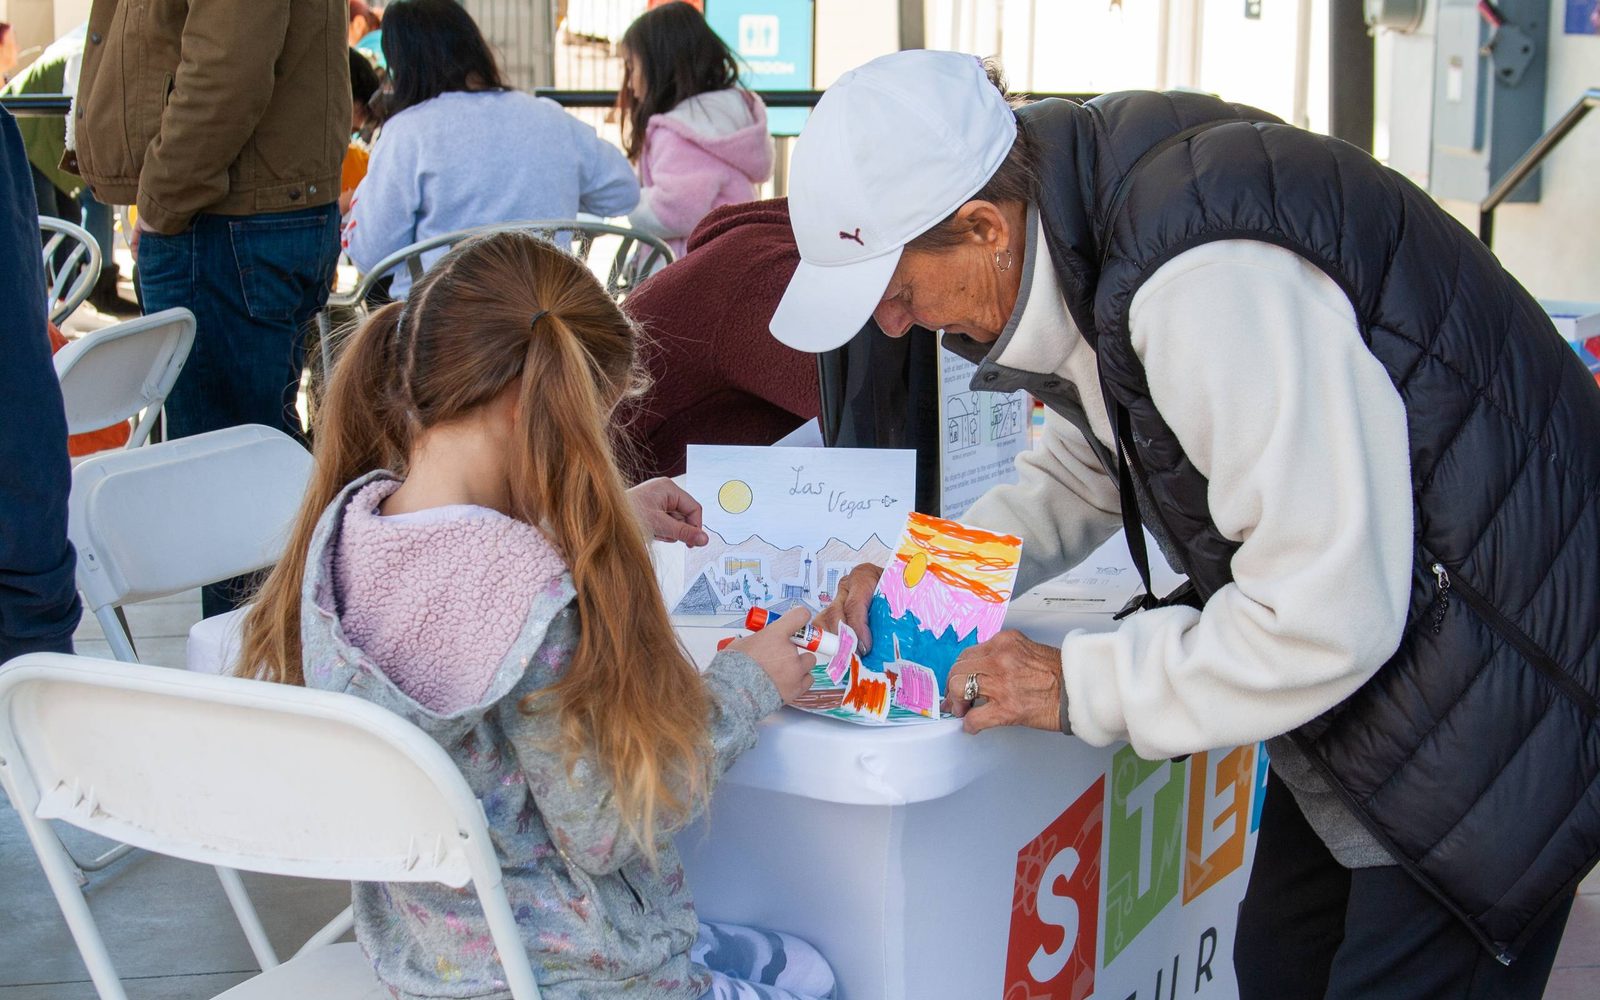 A parent helps their child glue on their project during a STEAM Saturday event at The Neon Museum.